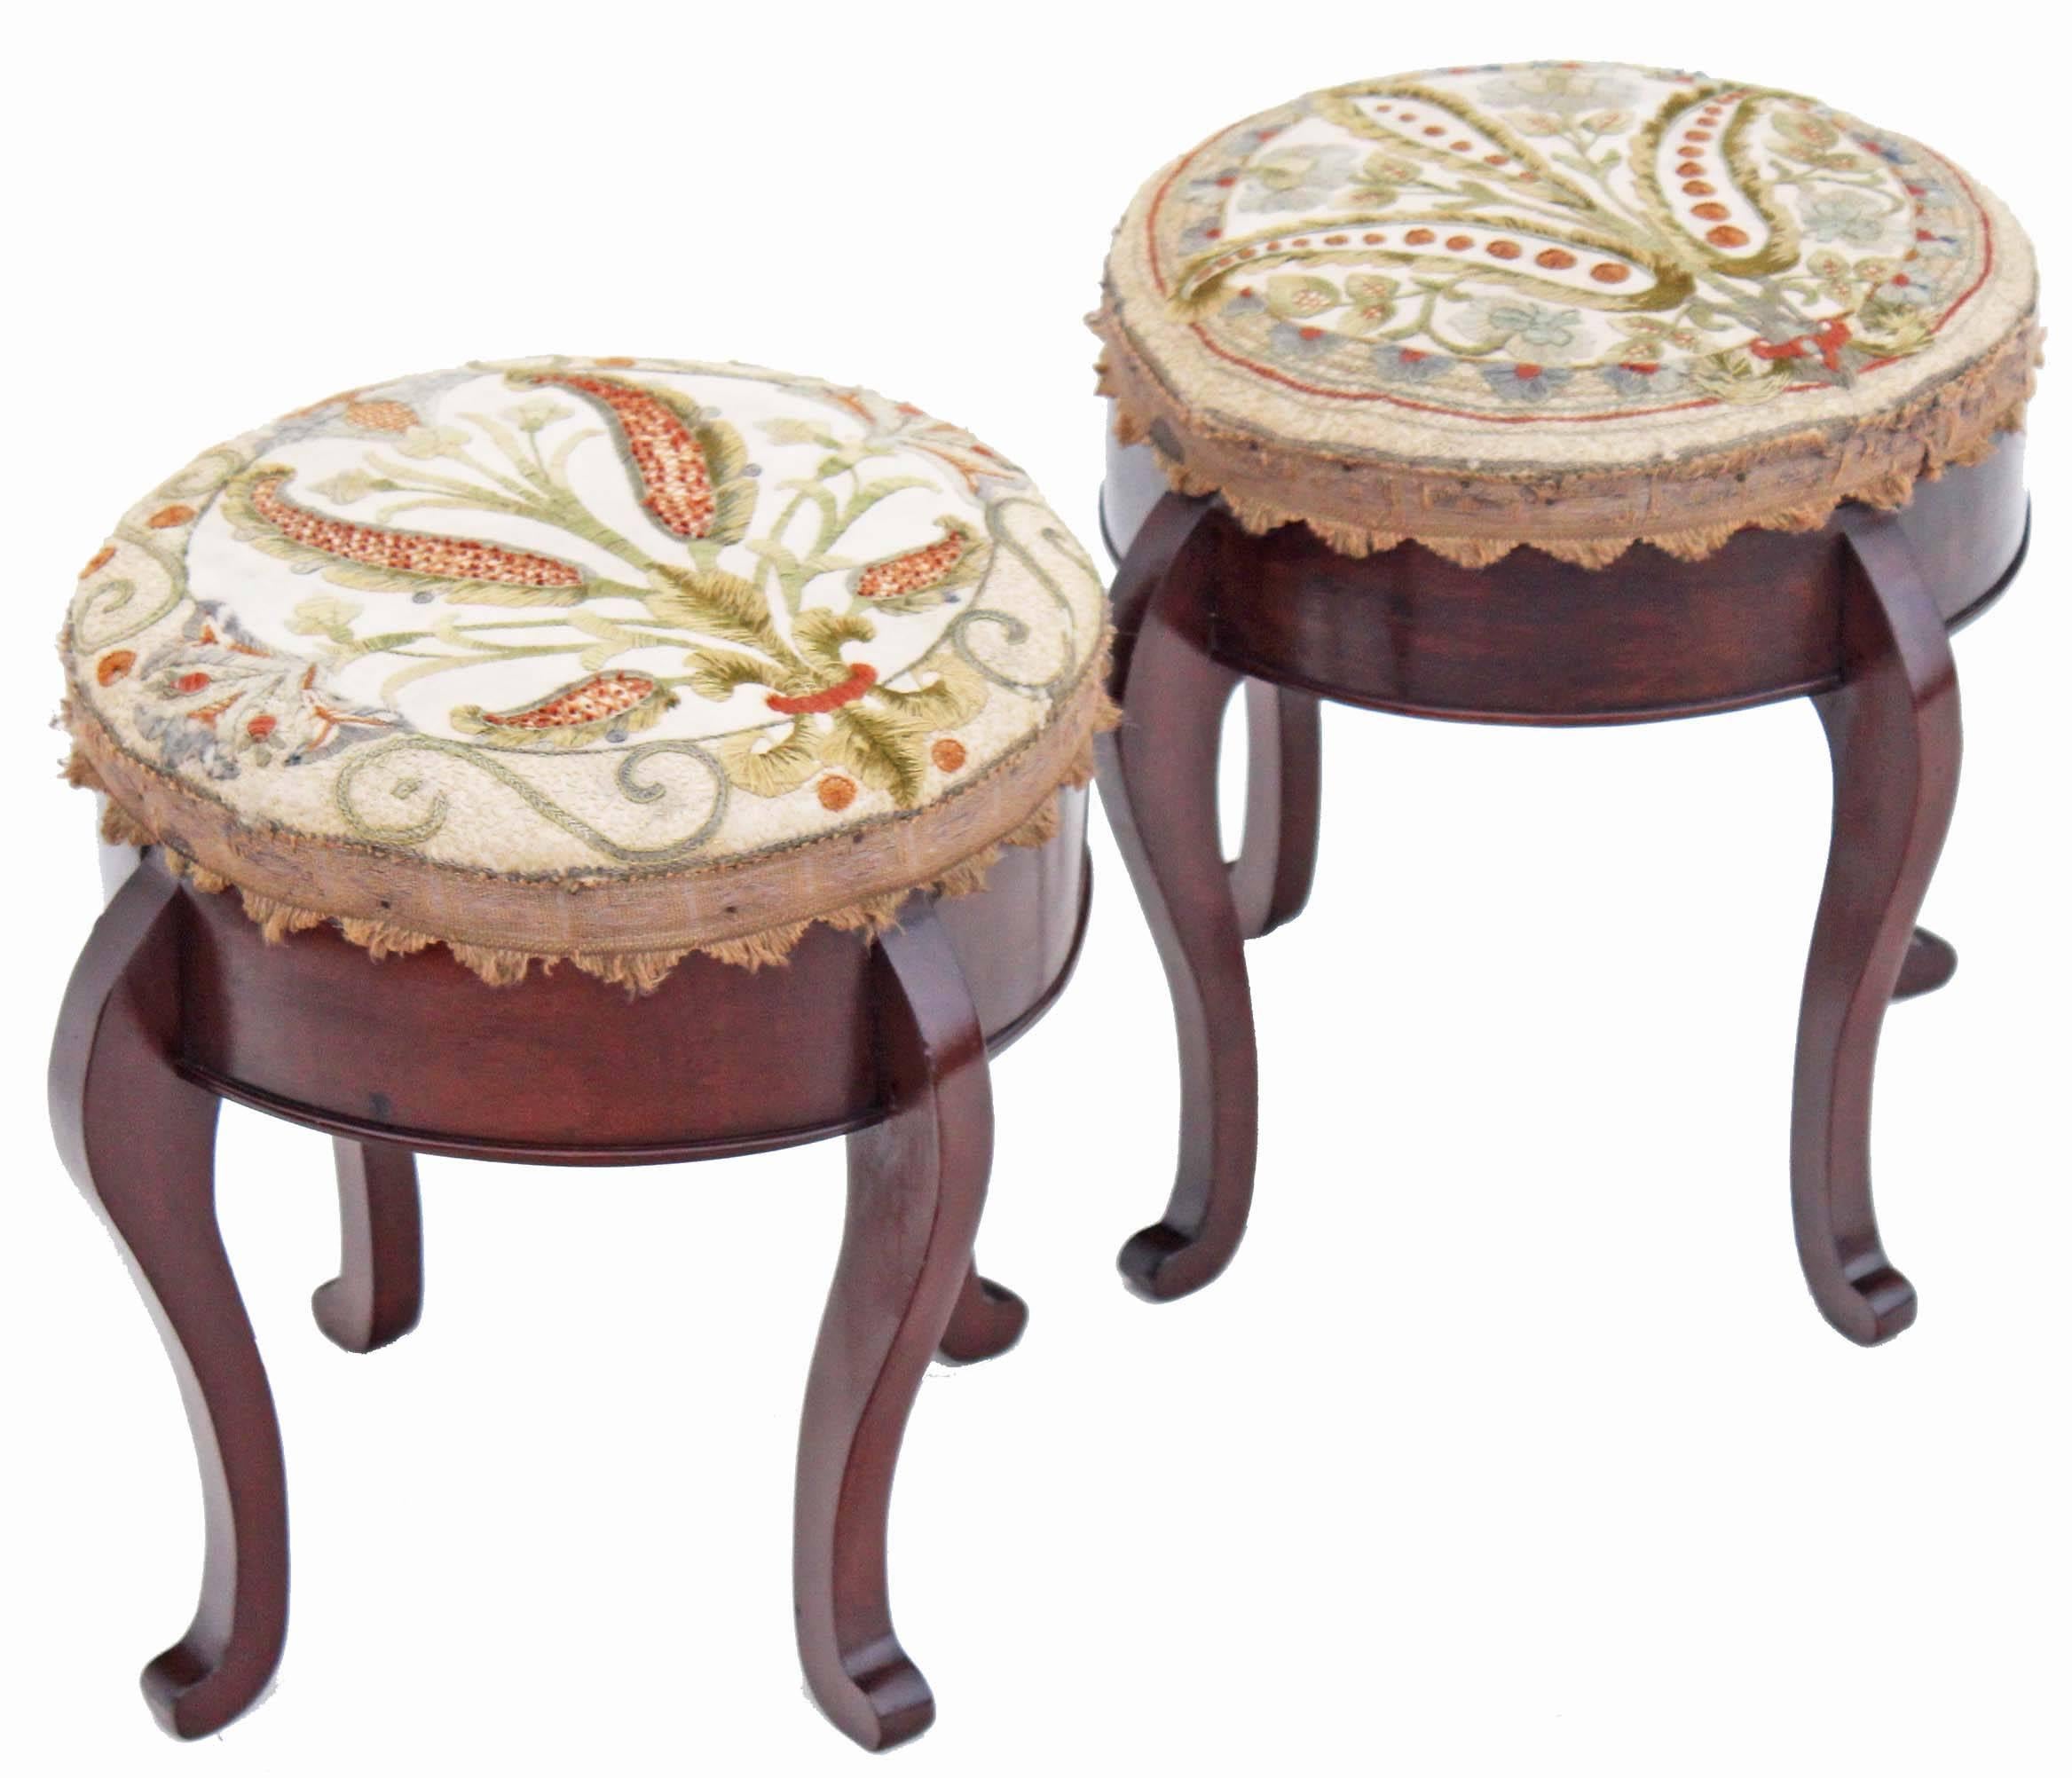 Antique pair of 19th century Victorian (or possibly Edwardian) embroidered needlework foot stools.

These are very rare and unusual items.

Lovely proportions and styling.

Solid, with no loose joints.

335mm diameter tops, overall maximum